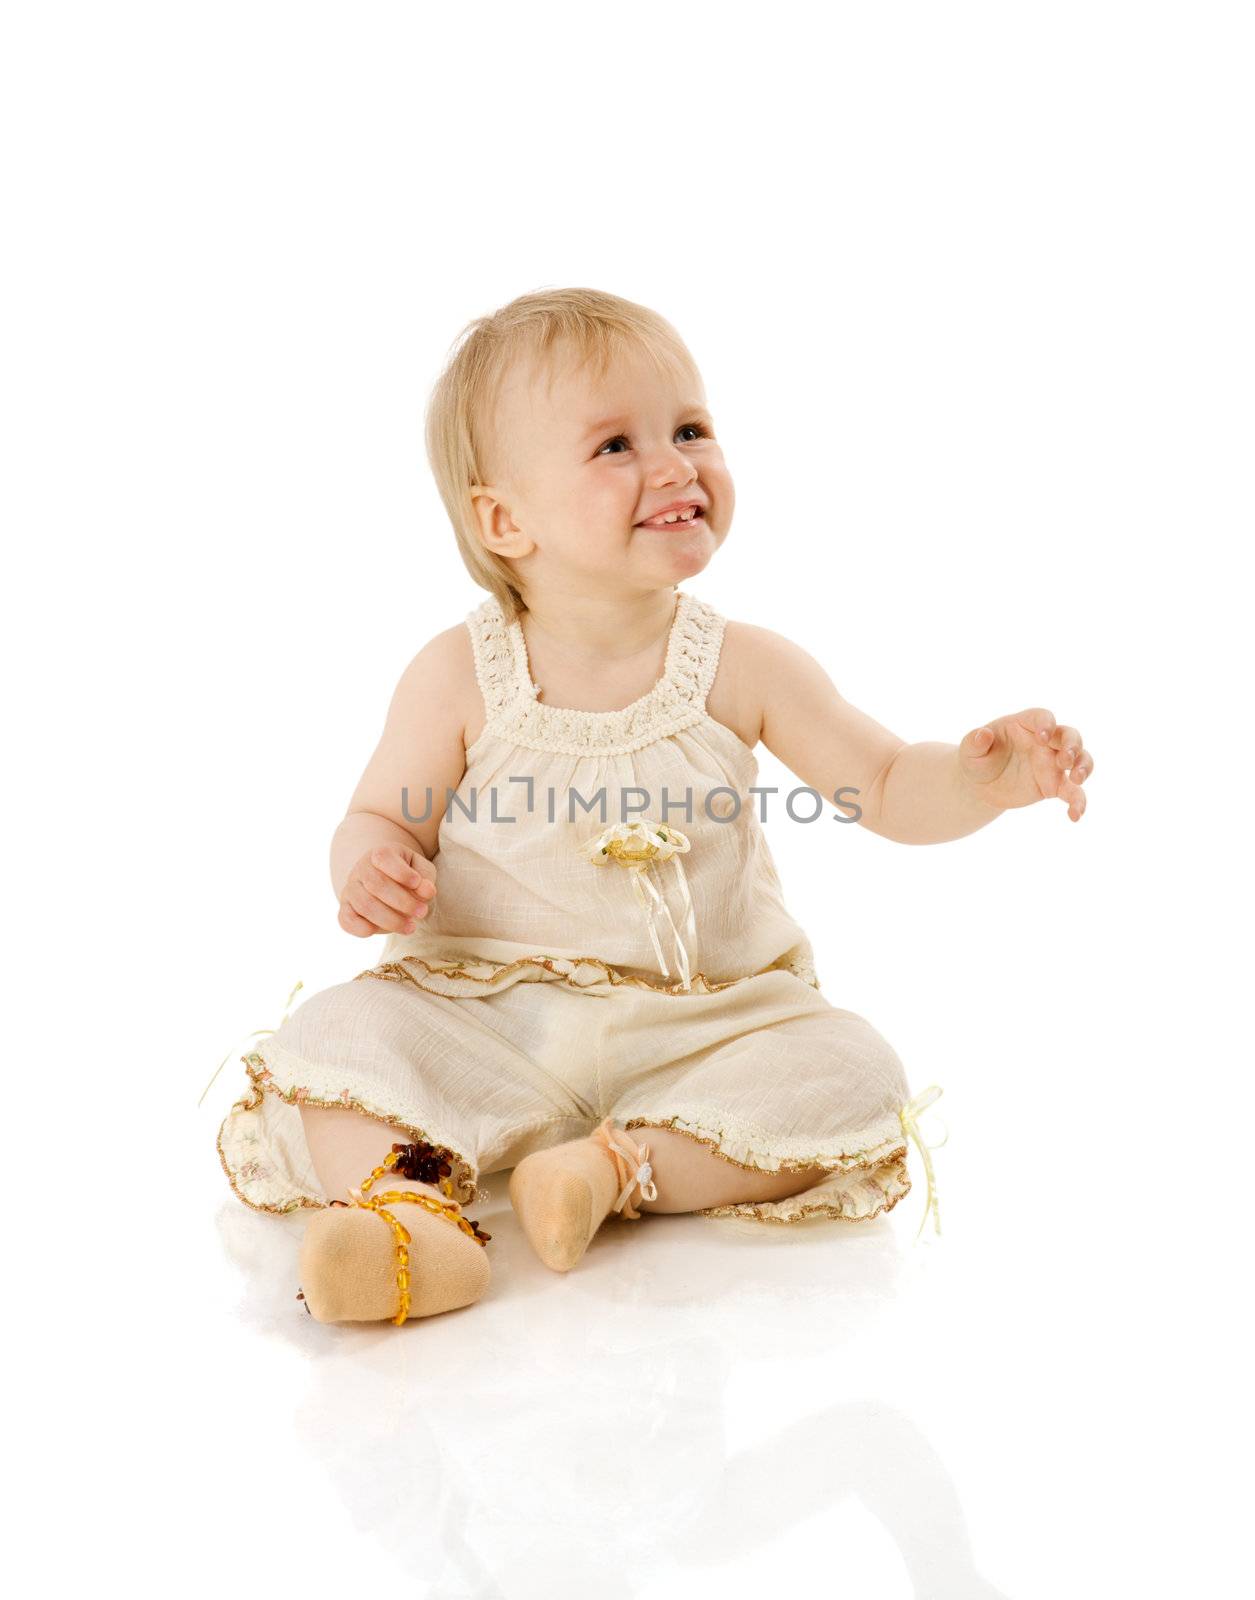 Adorable Baby Girl in one year age isolated on white